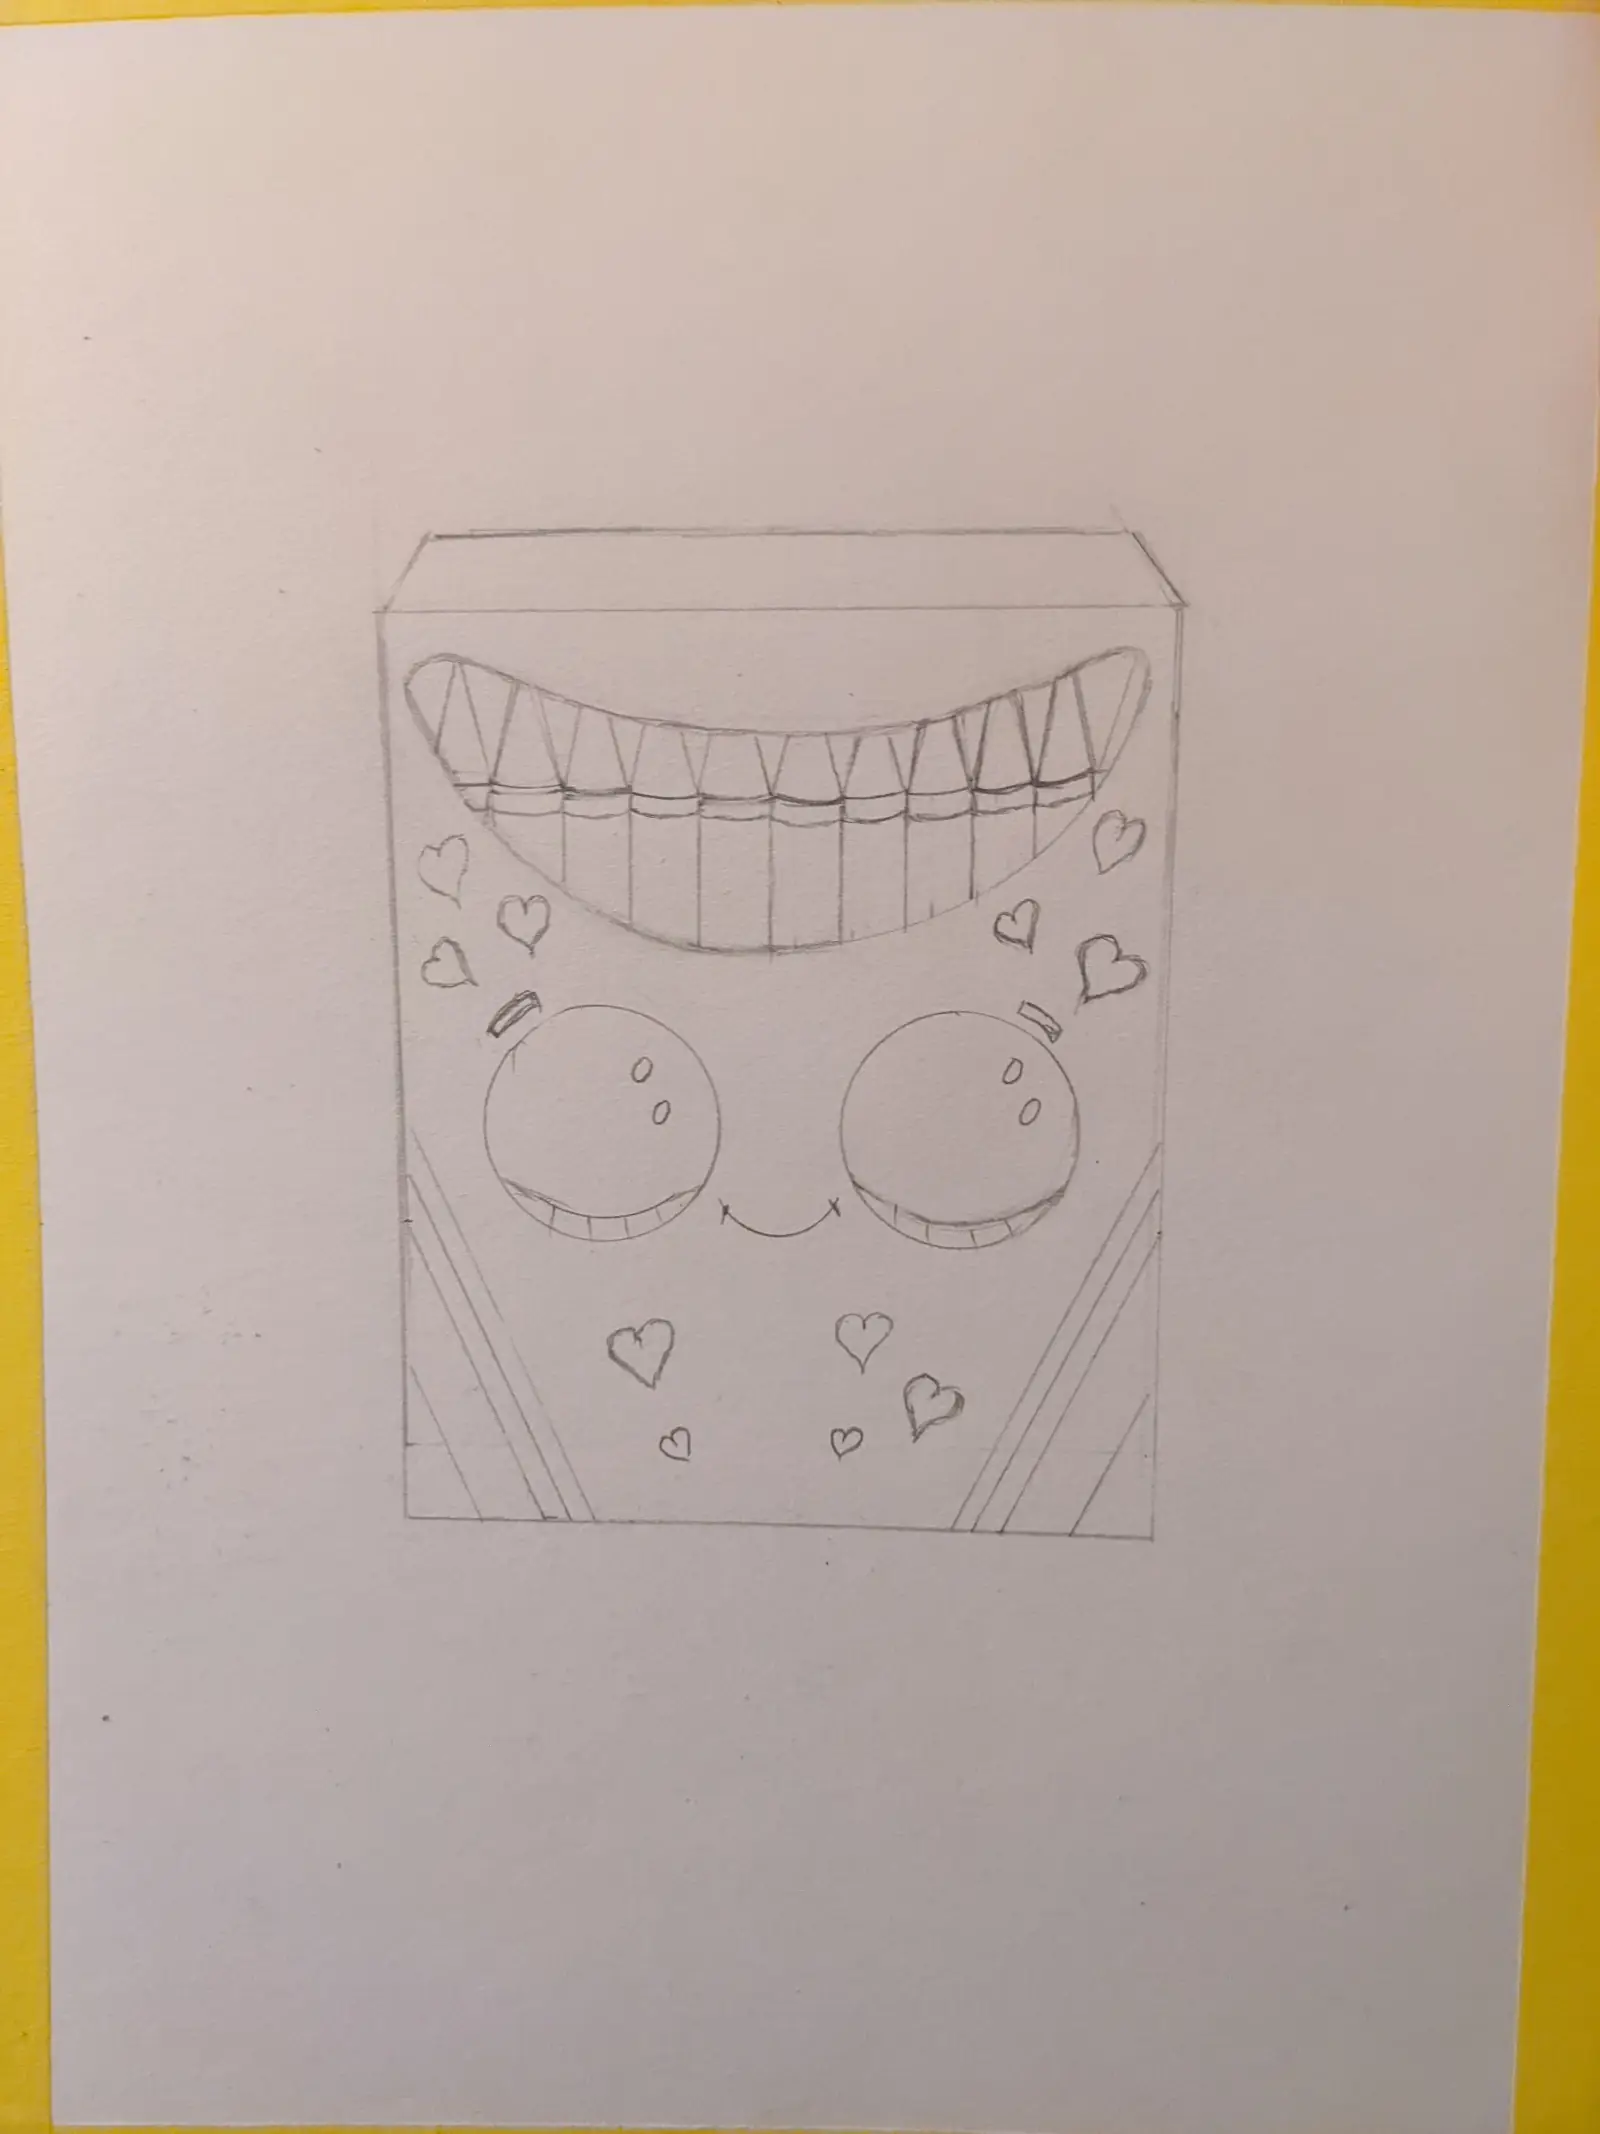 Hand-drawn color crayon box with a face and hearts on the design. Sketched.